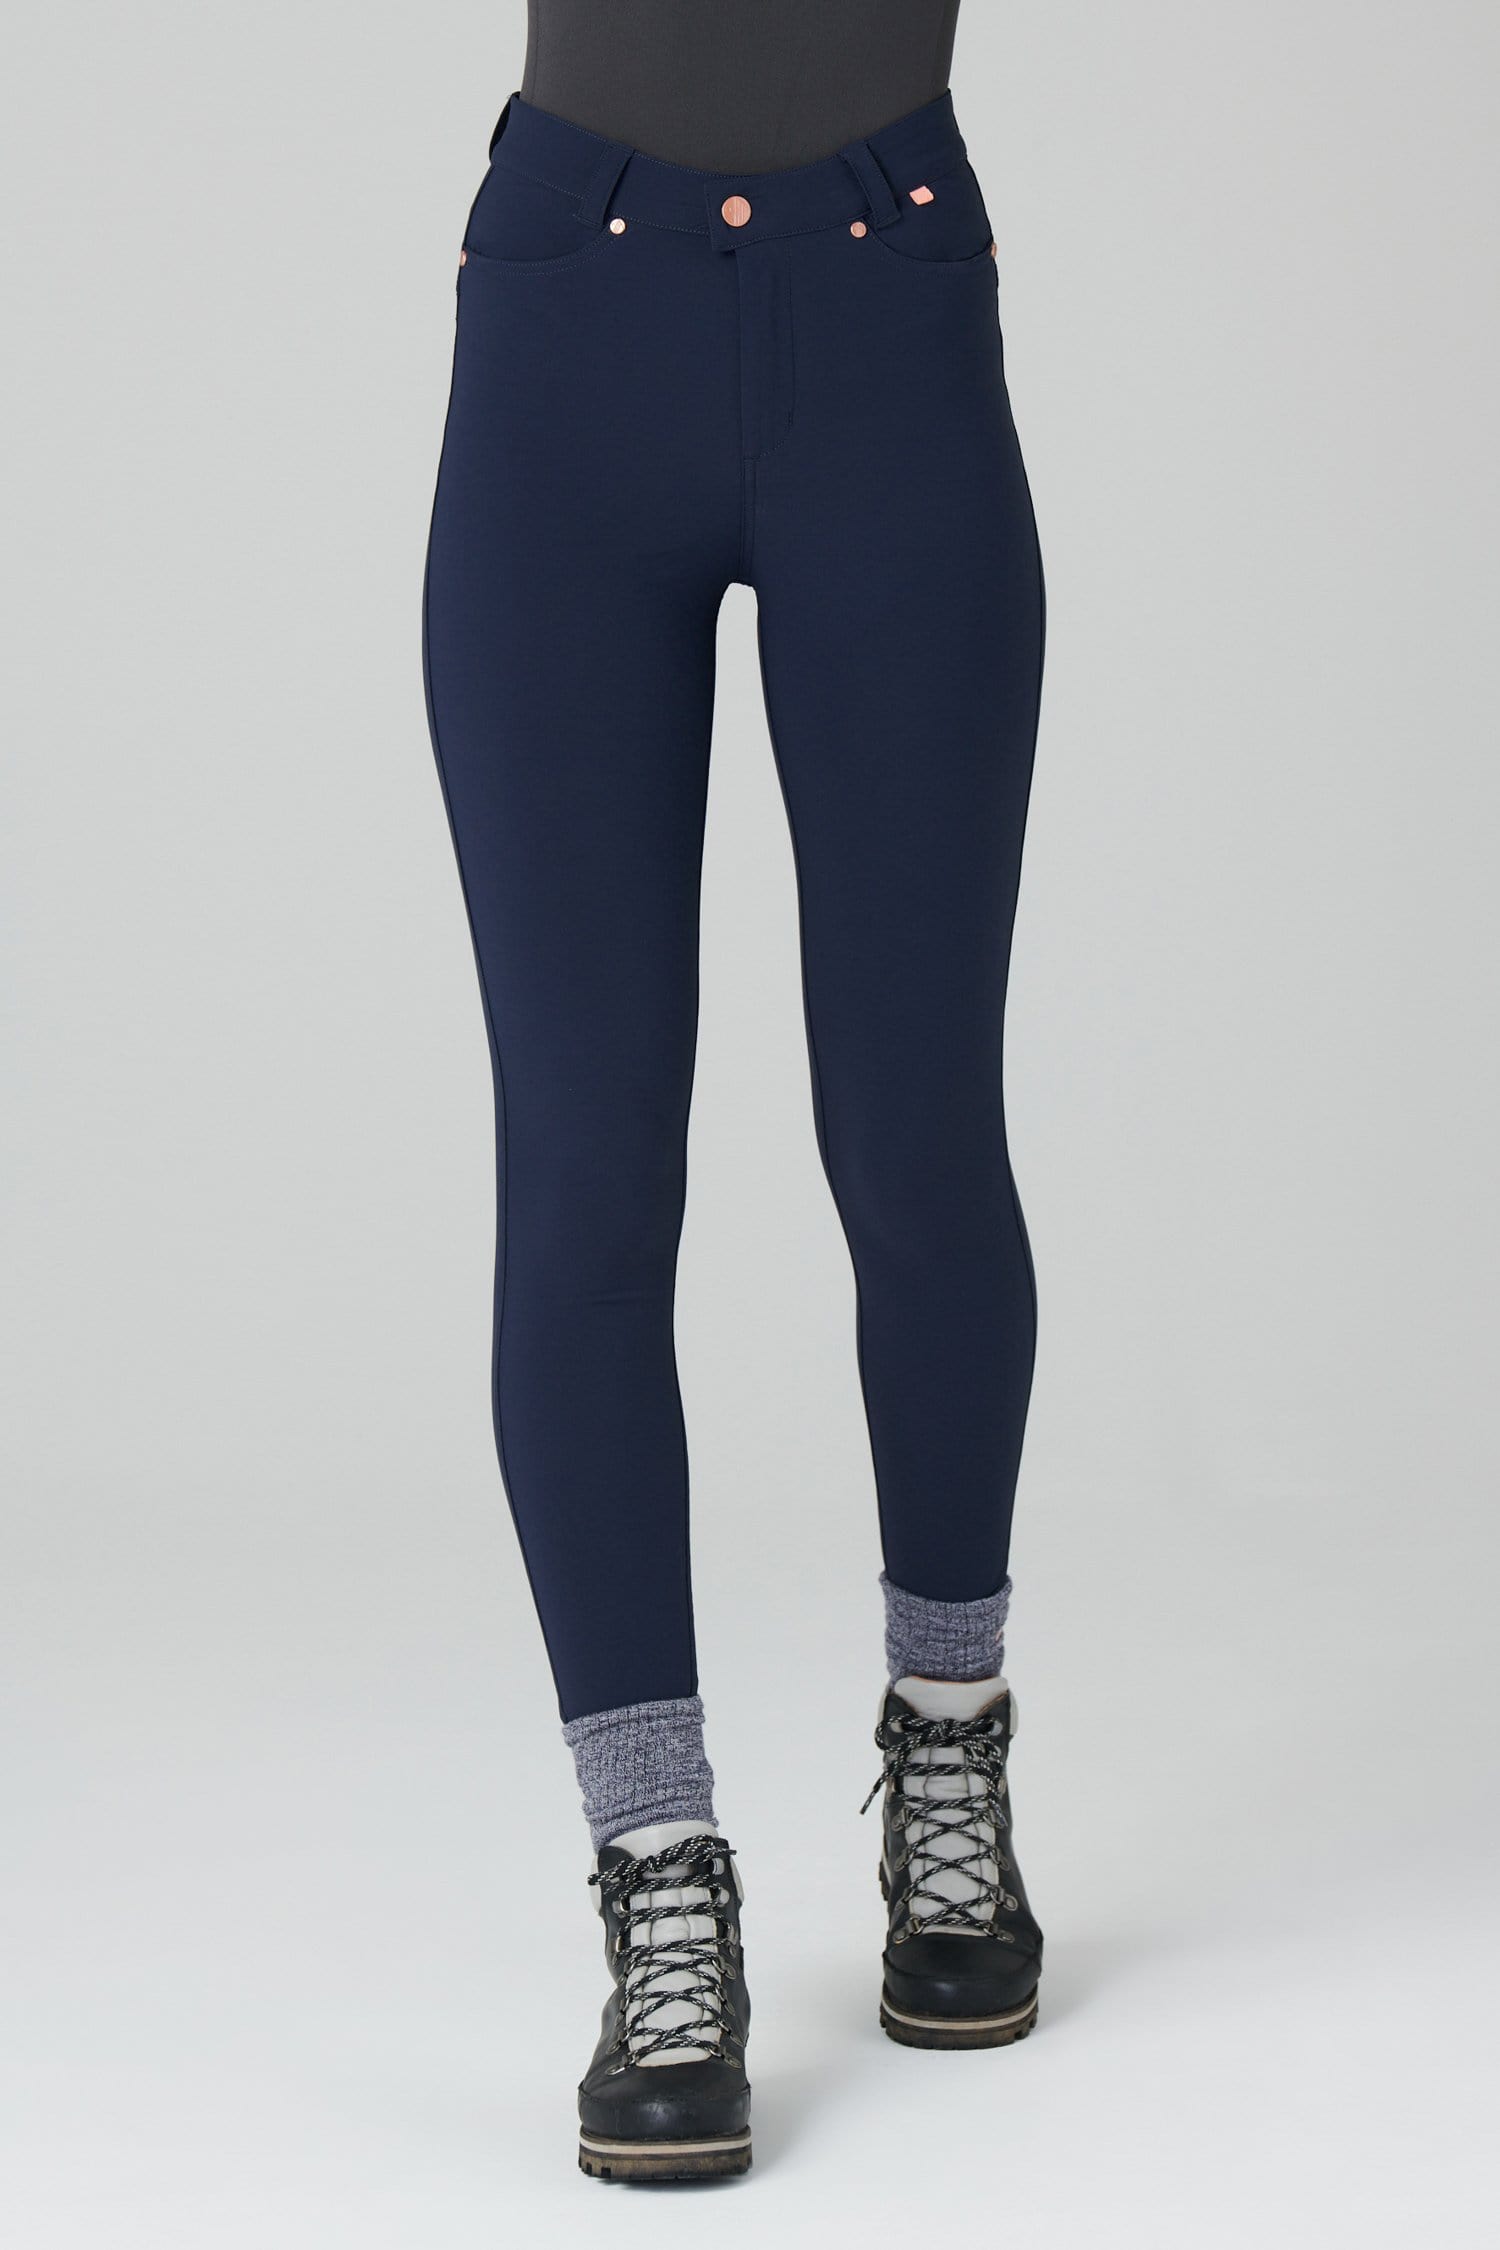 Max Stretch Skinny Outdoor Trousers - Deep Navy - 40r / Uk22 - Womens - Acai Outdoorwear